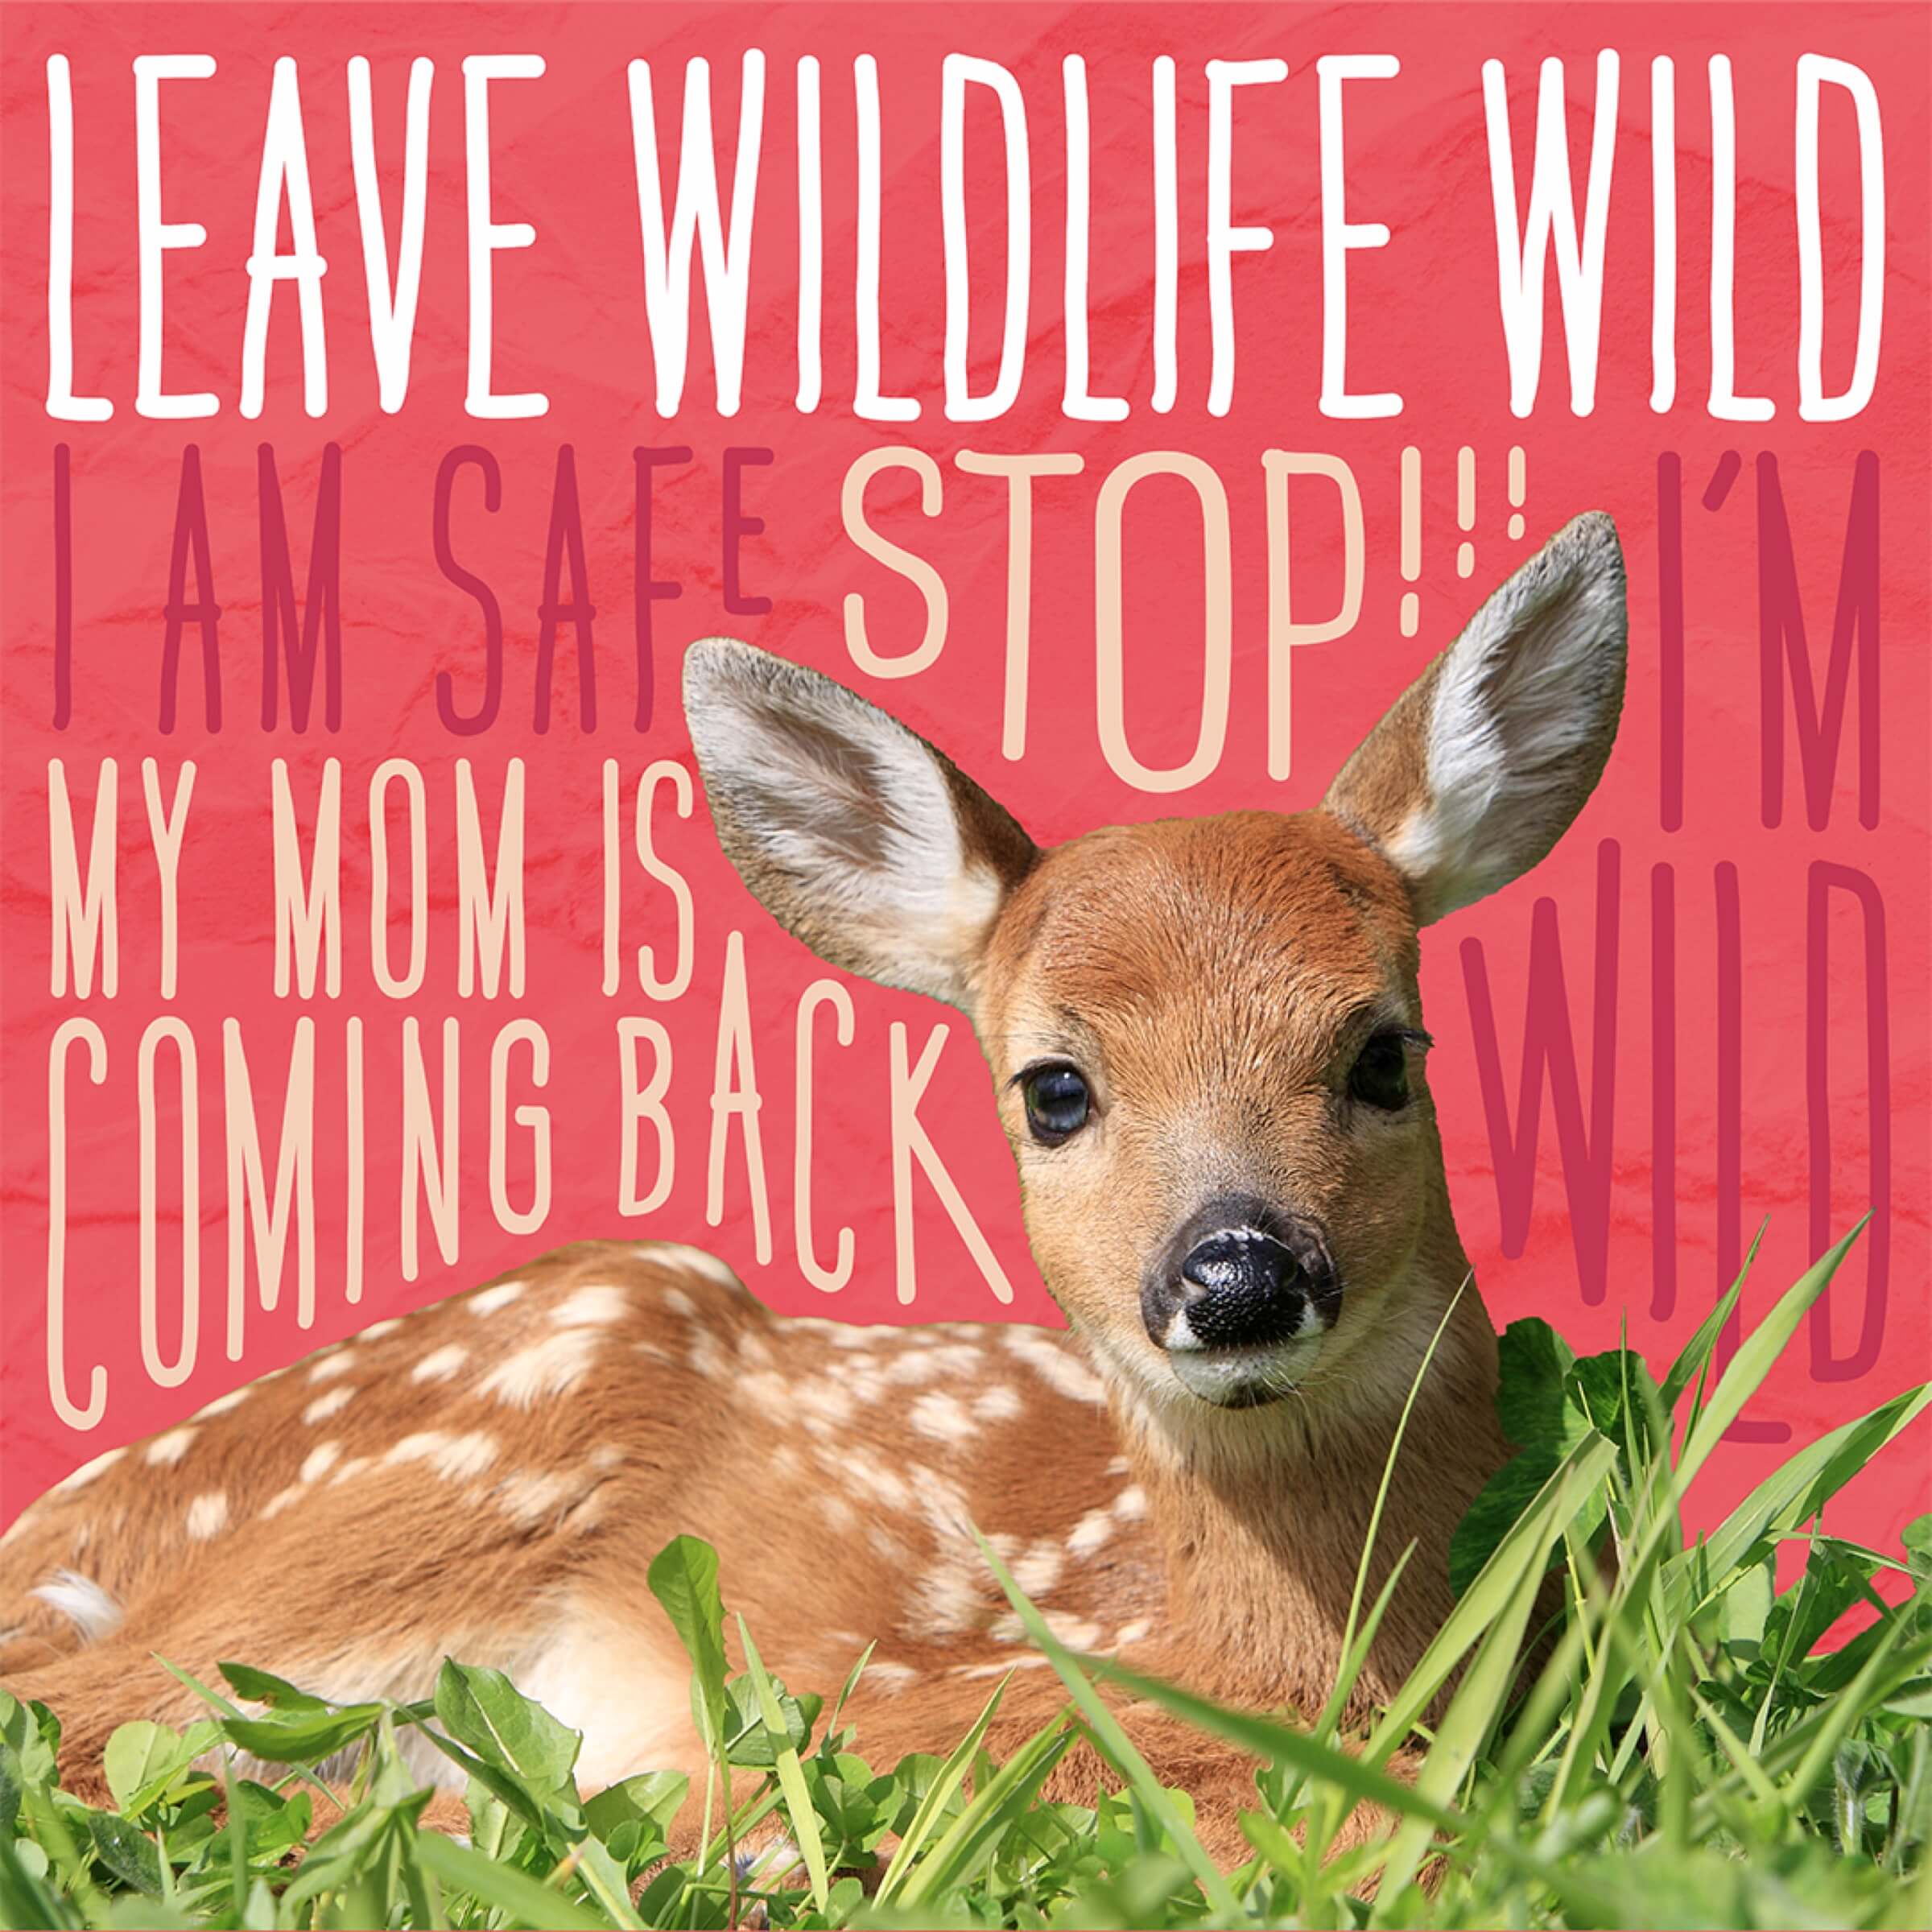 ODFW – Don’t kidnap young wildlife and take away their best chance of survival